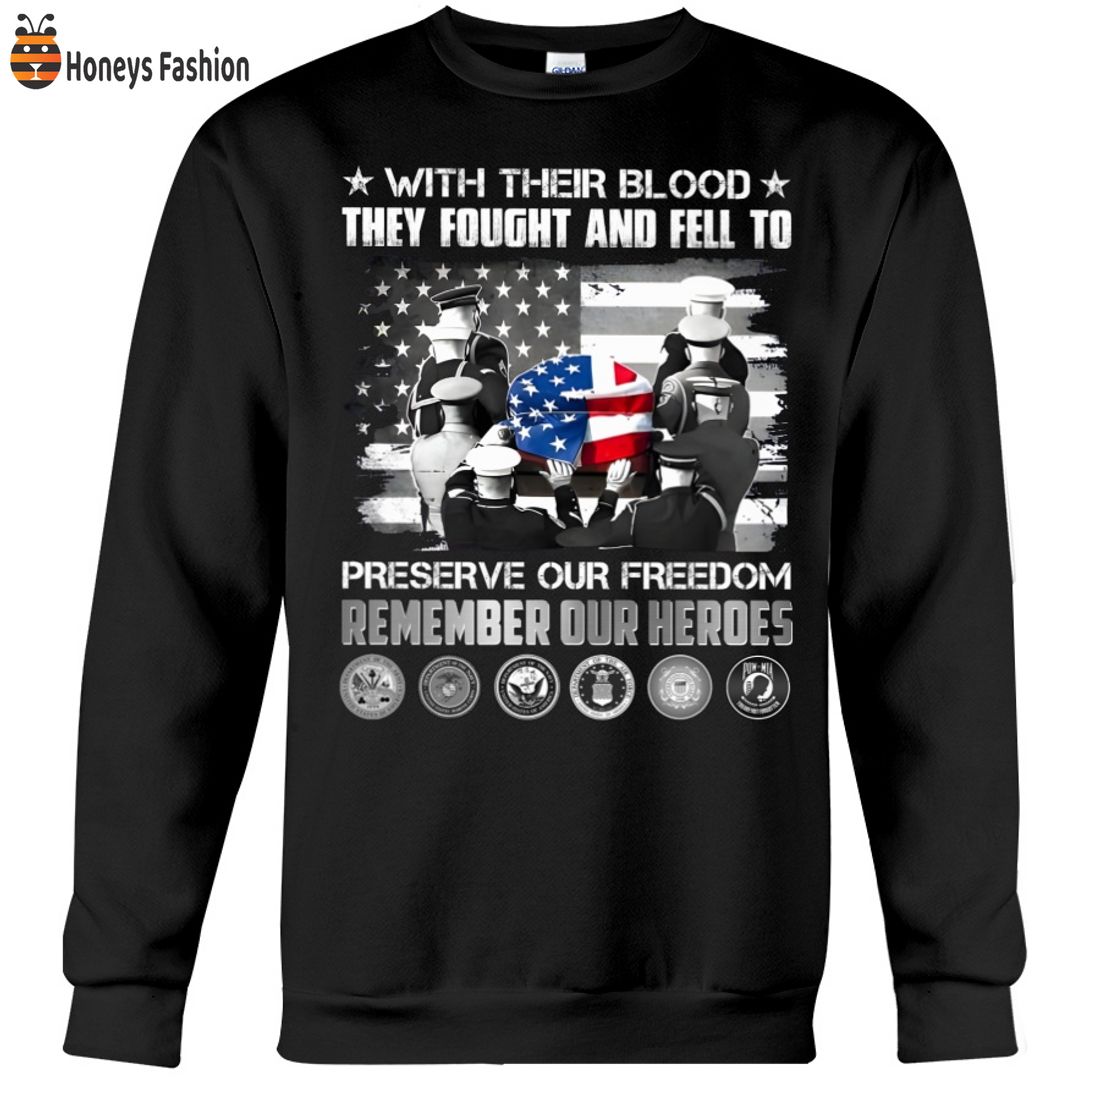 BEST SELLER With Their Blood They Fought And Fell 2D Hoodie Tshirt